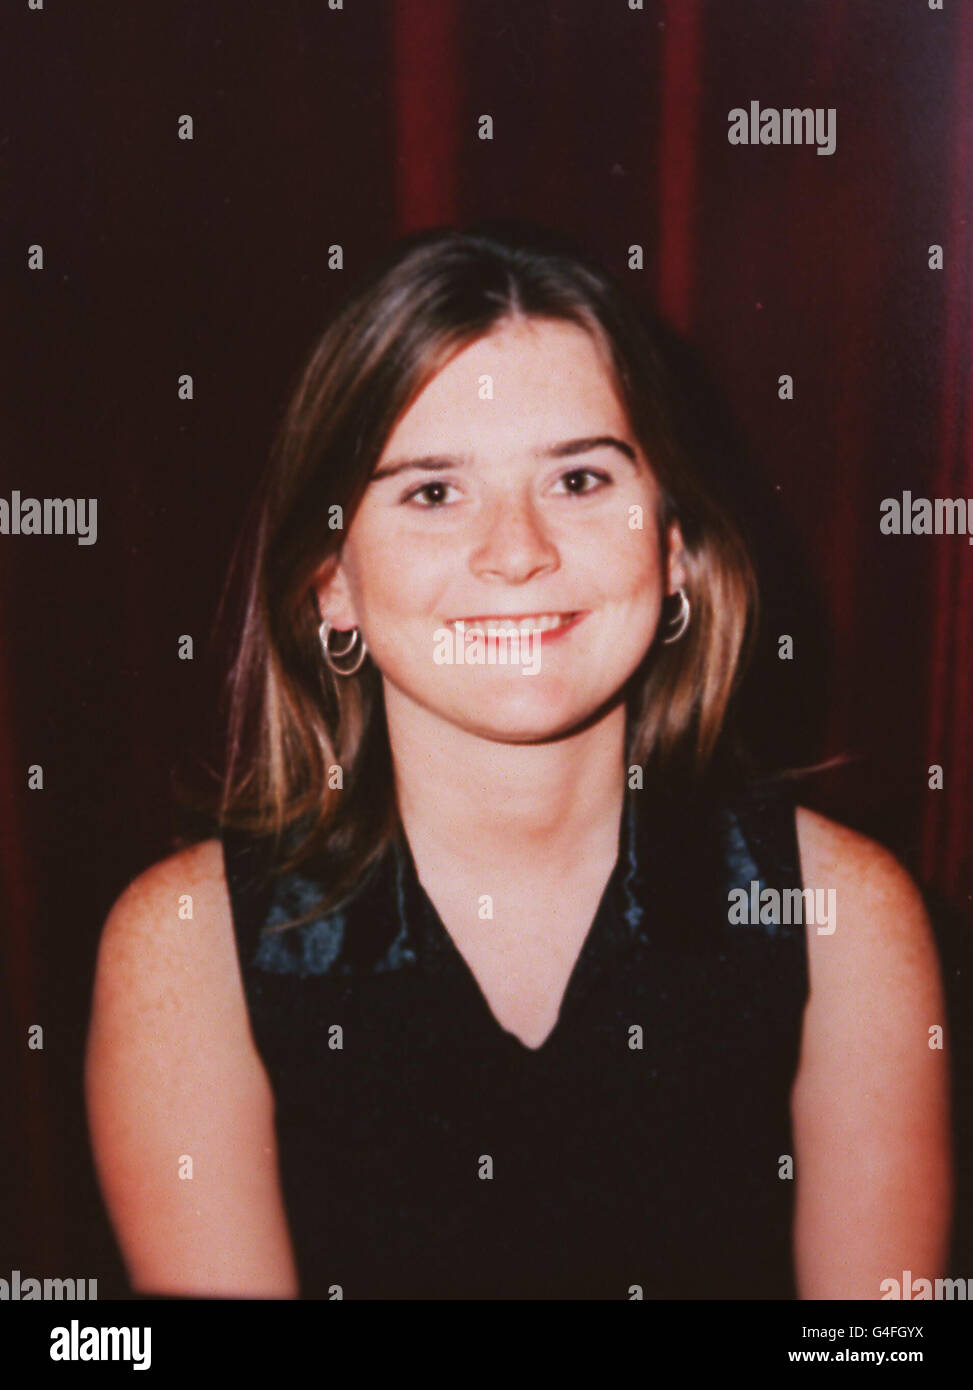 Jenny King, 22, who was murdered as she made her way home from the nightclub Chasers in Kingswood, Bristol. Police reconstructed her movements in the hope that it might lead to her killer. 4/12/98: A man has appeared in court in Bristol, charged with her murder. * 6/3/00: Paul Hunt, of Malvern Drive, Warmley is due to go on trial at Bristol Crown Court Stock Photo